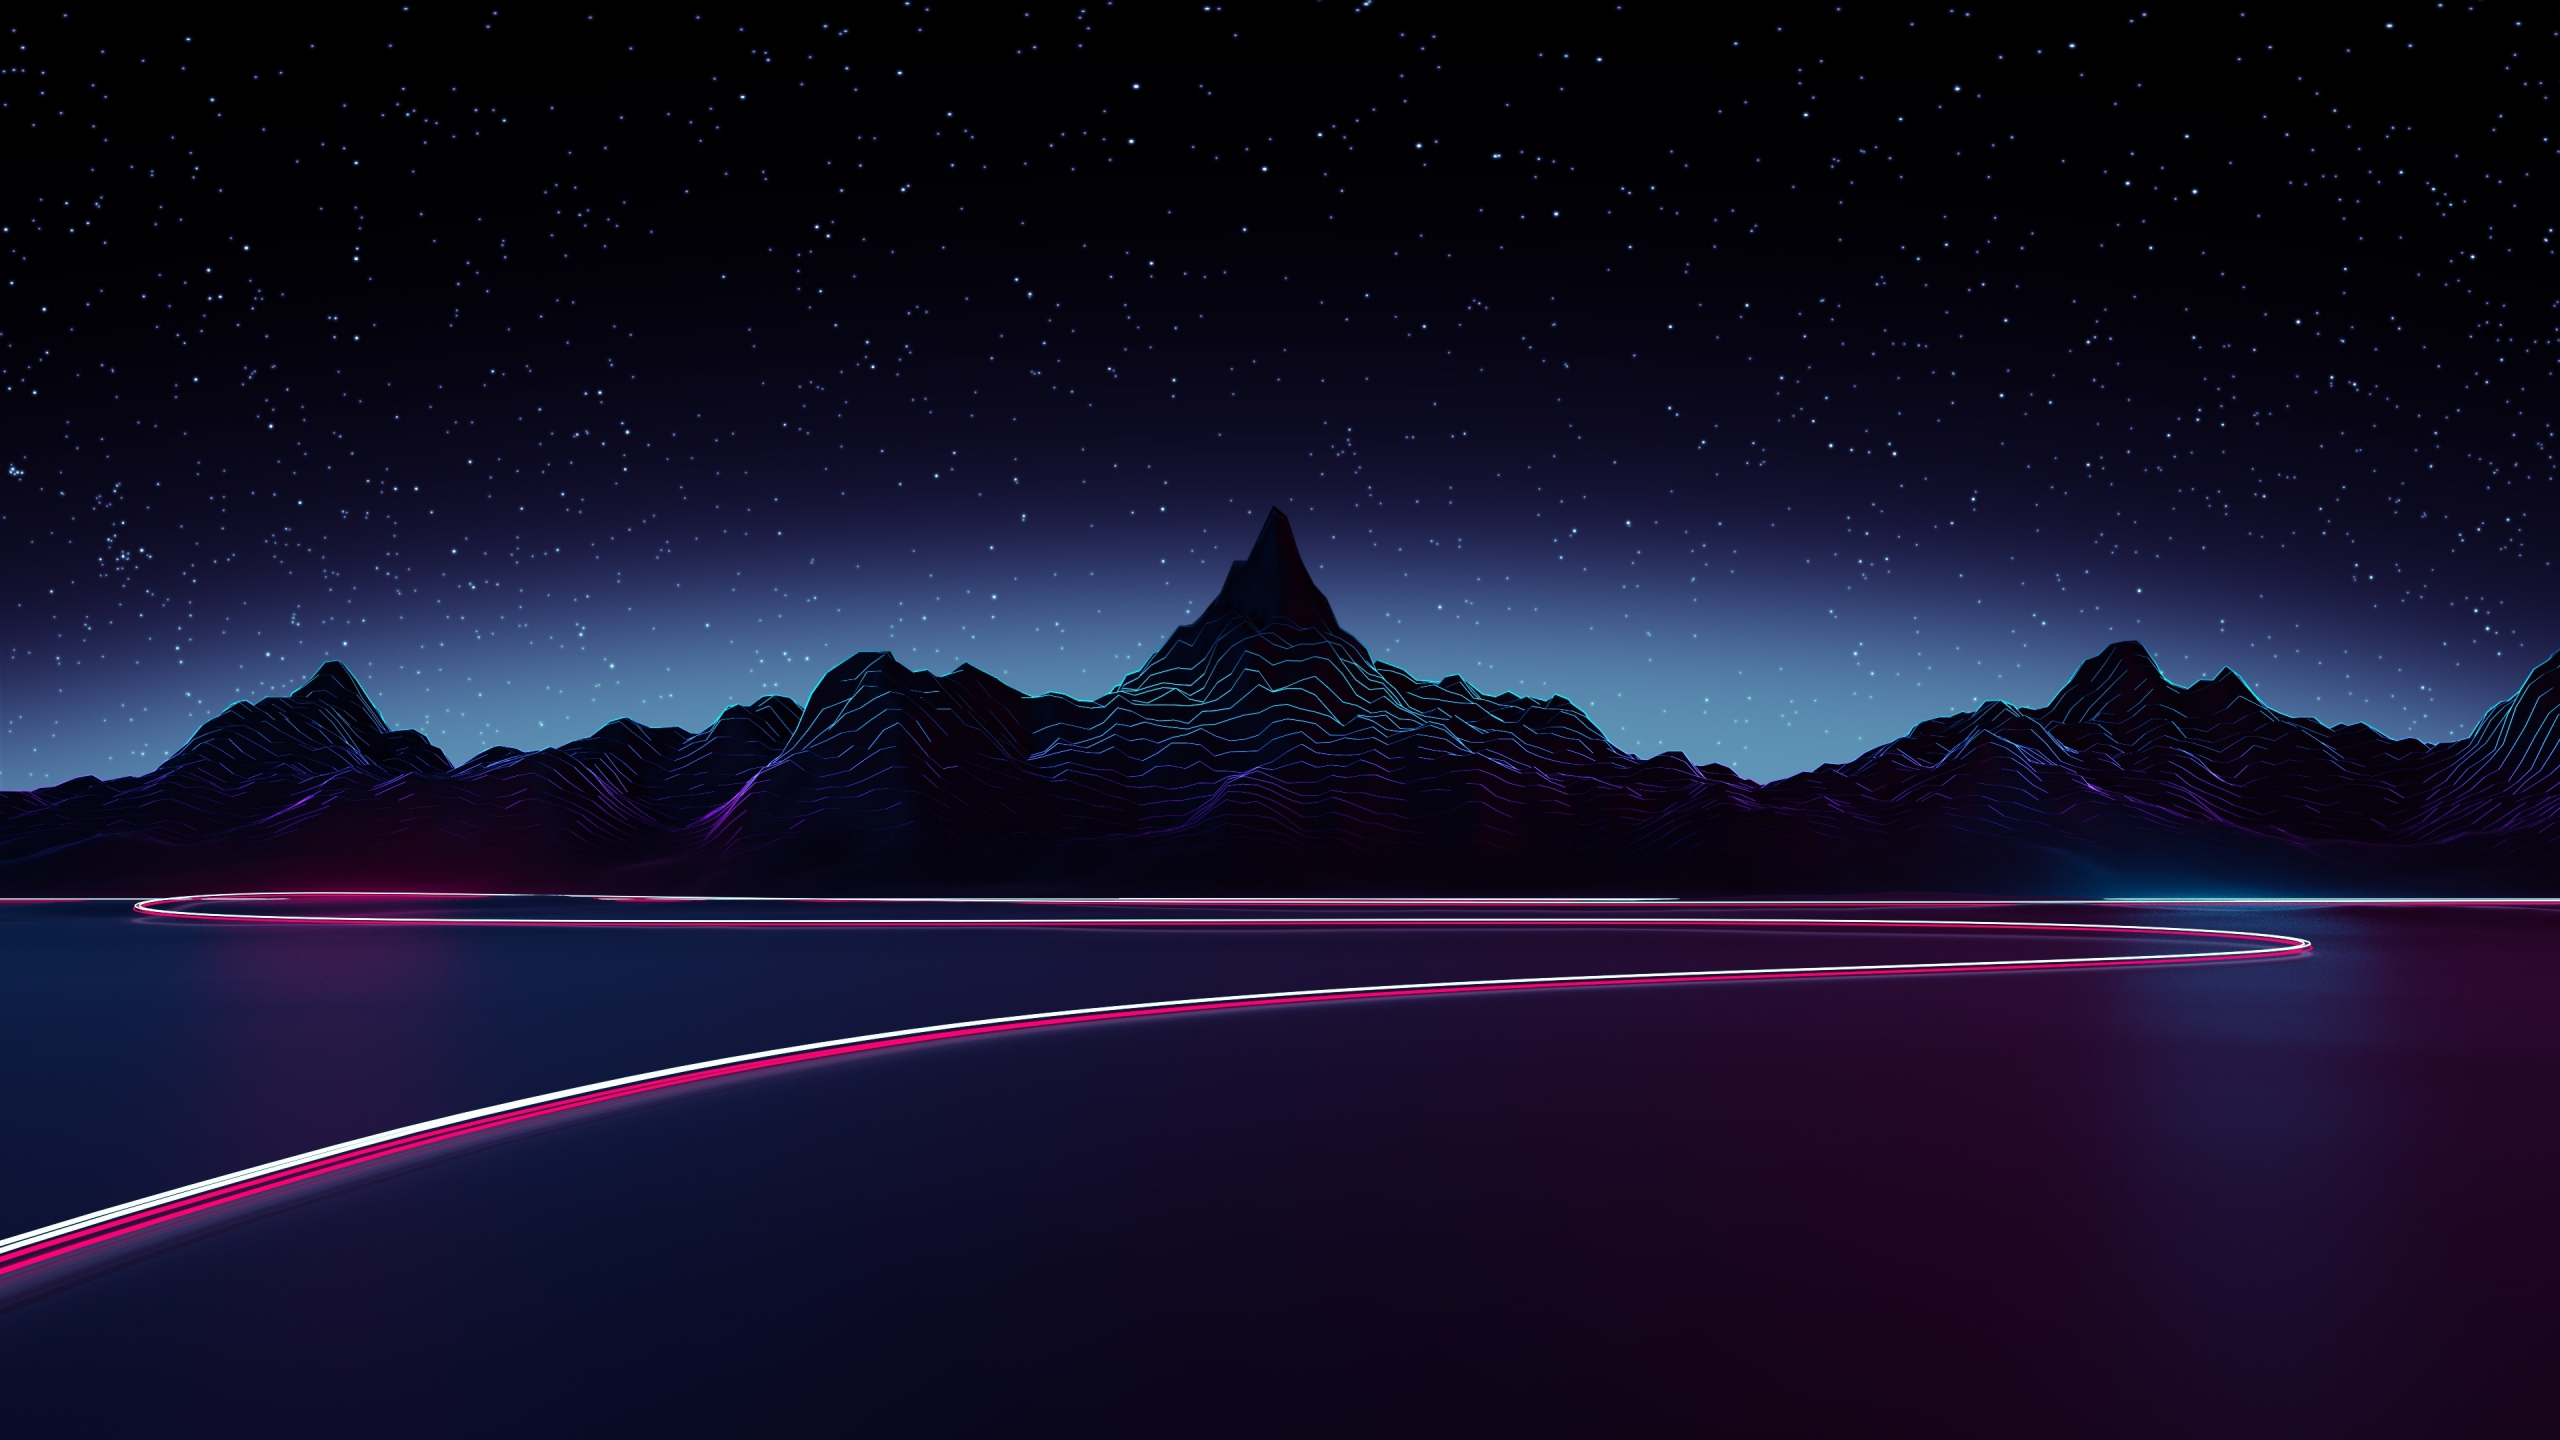 Download 2560x1440 Wallpaper Silhouette Mountains Artwork Synthwave Dual Wide Widescreen 16 9 Widescreen 2560x1440 Hd Image Background